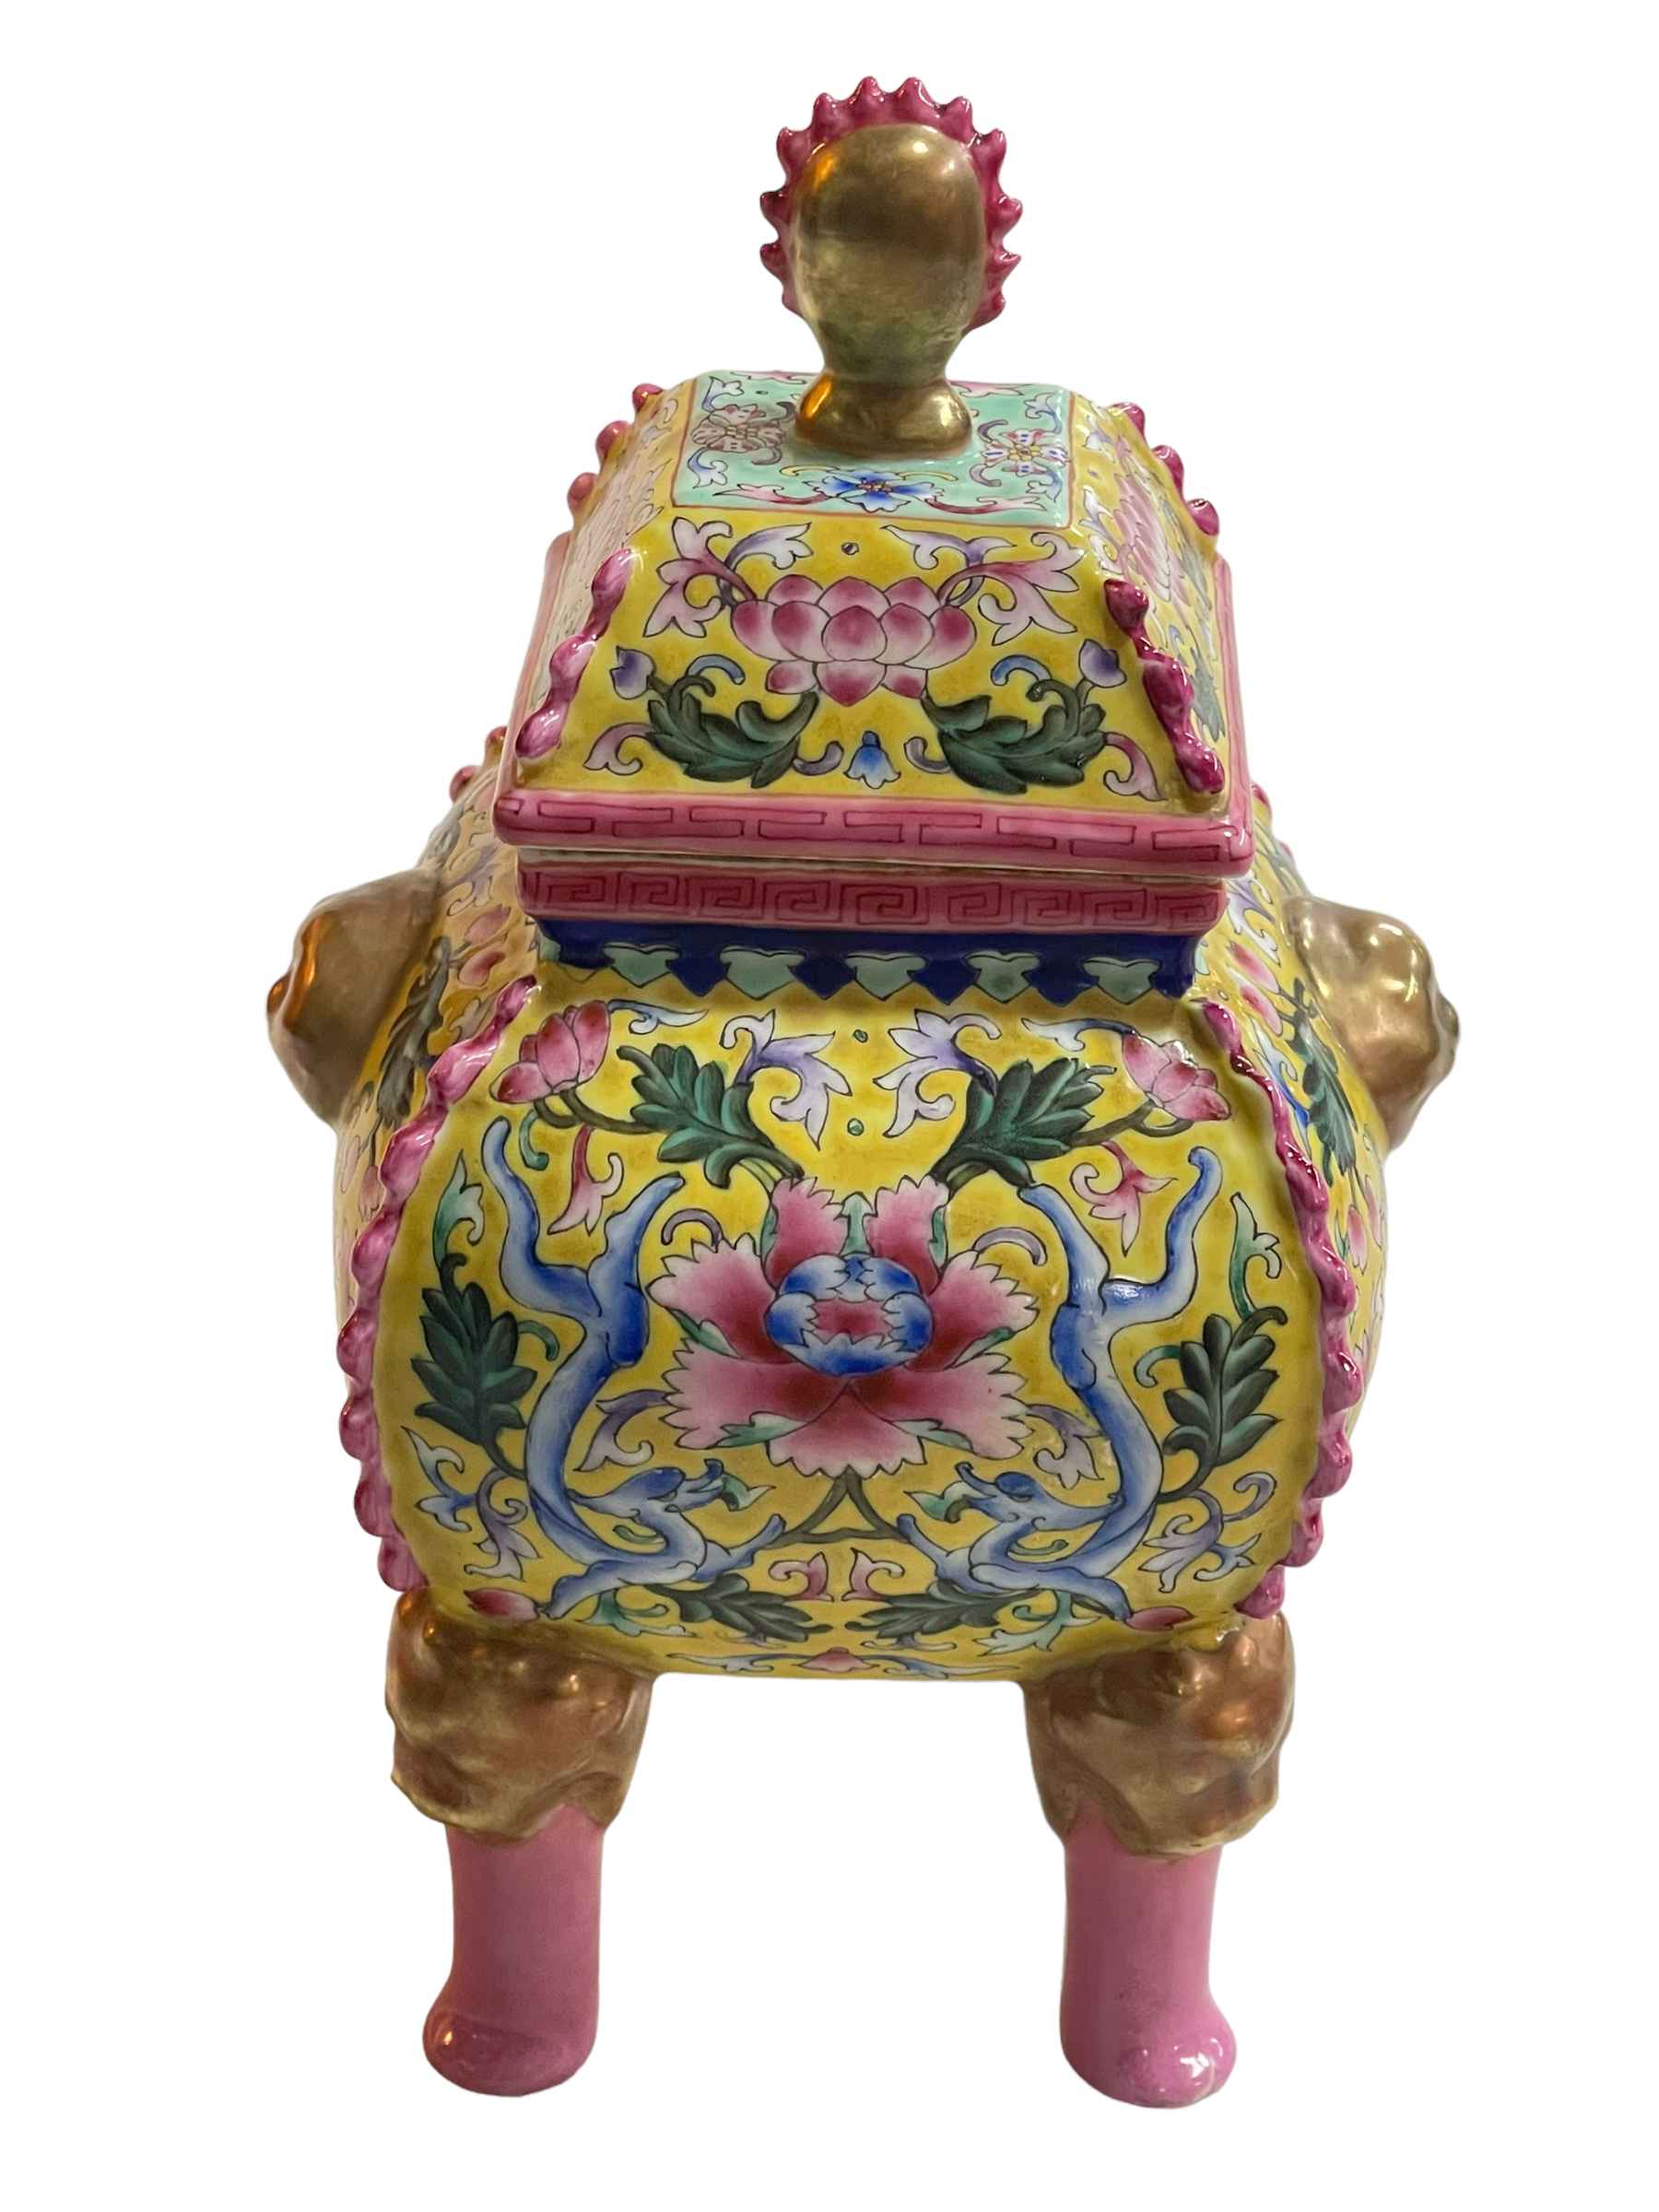 Chinese pottery four legged censor with floral and gilt design on yellow and pink ground,